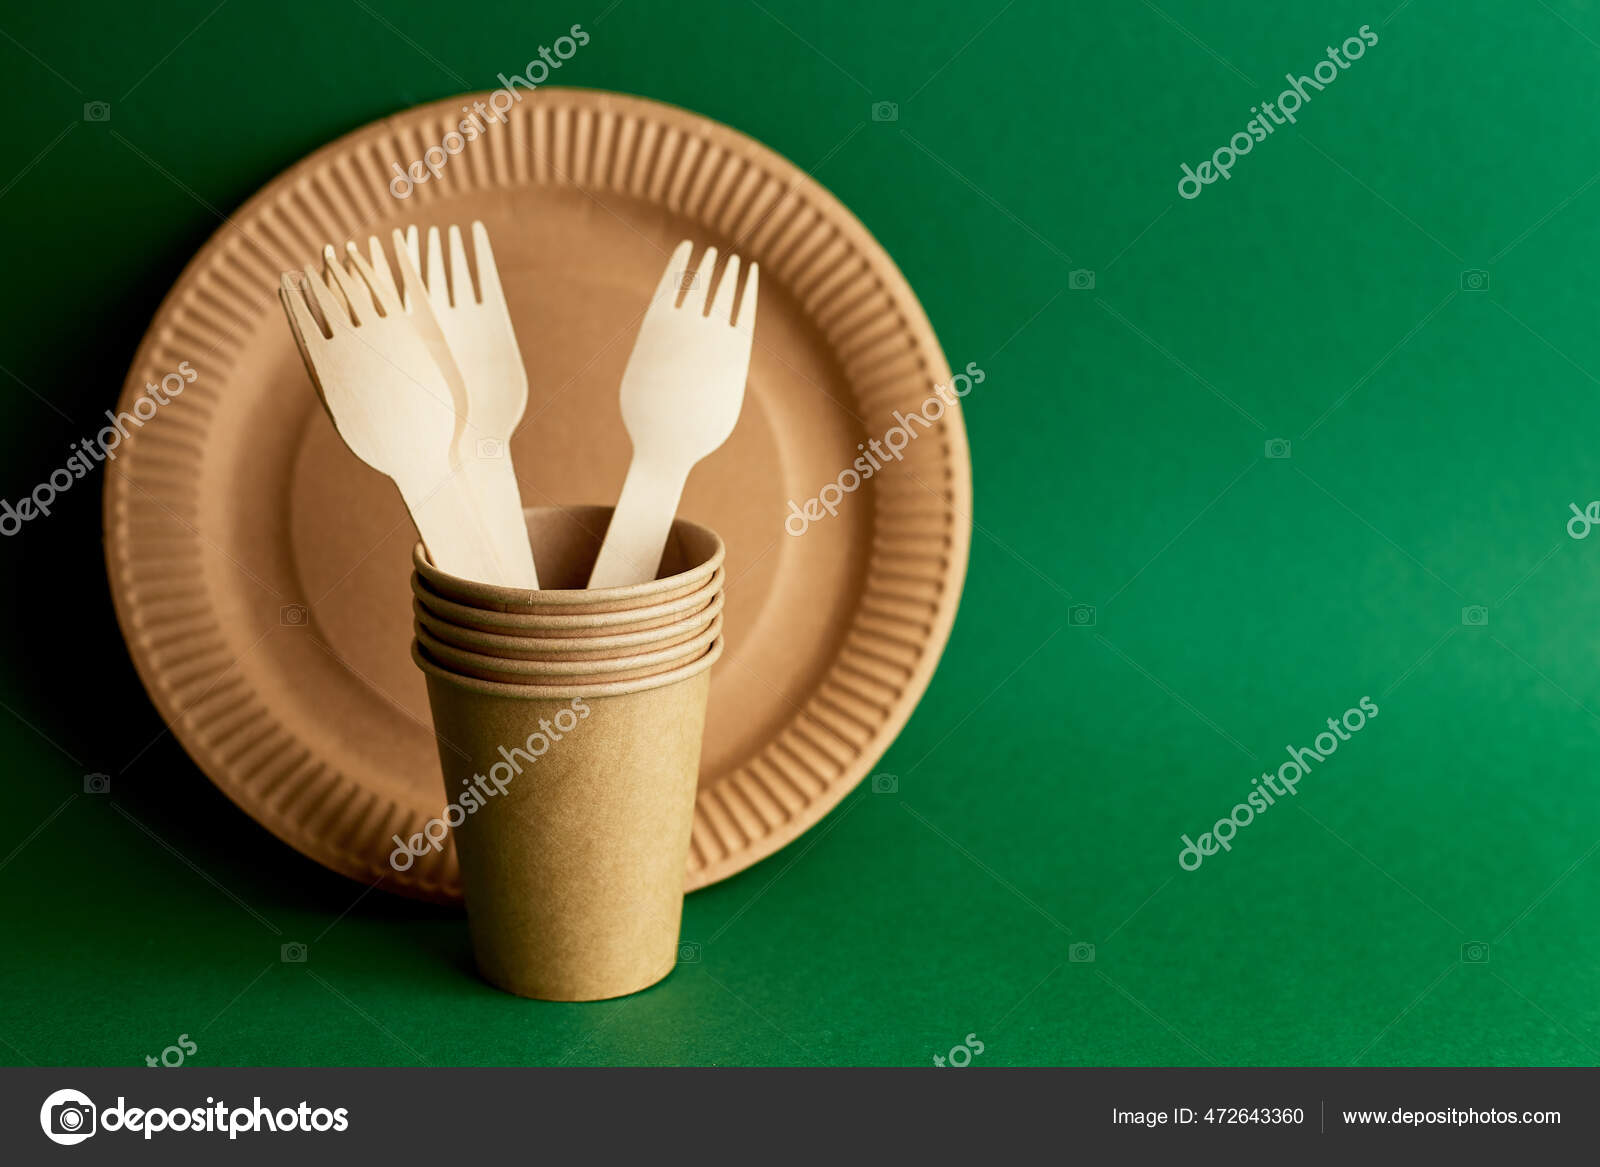 Eco Friendly and Sustainable Tableware